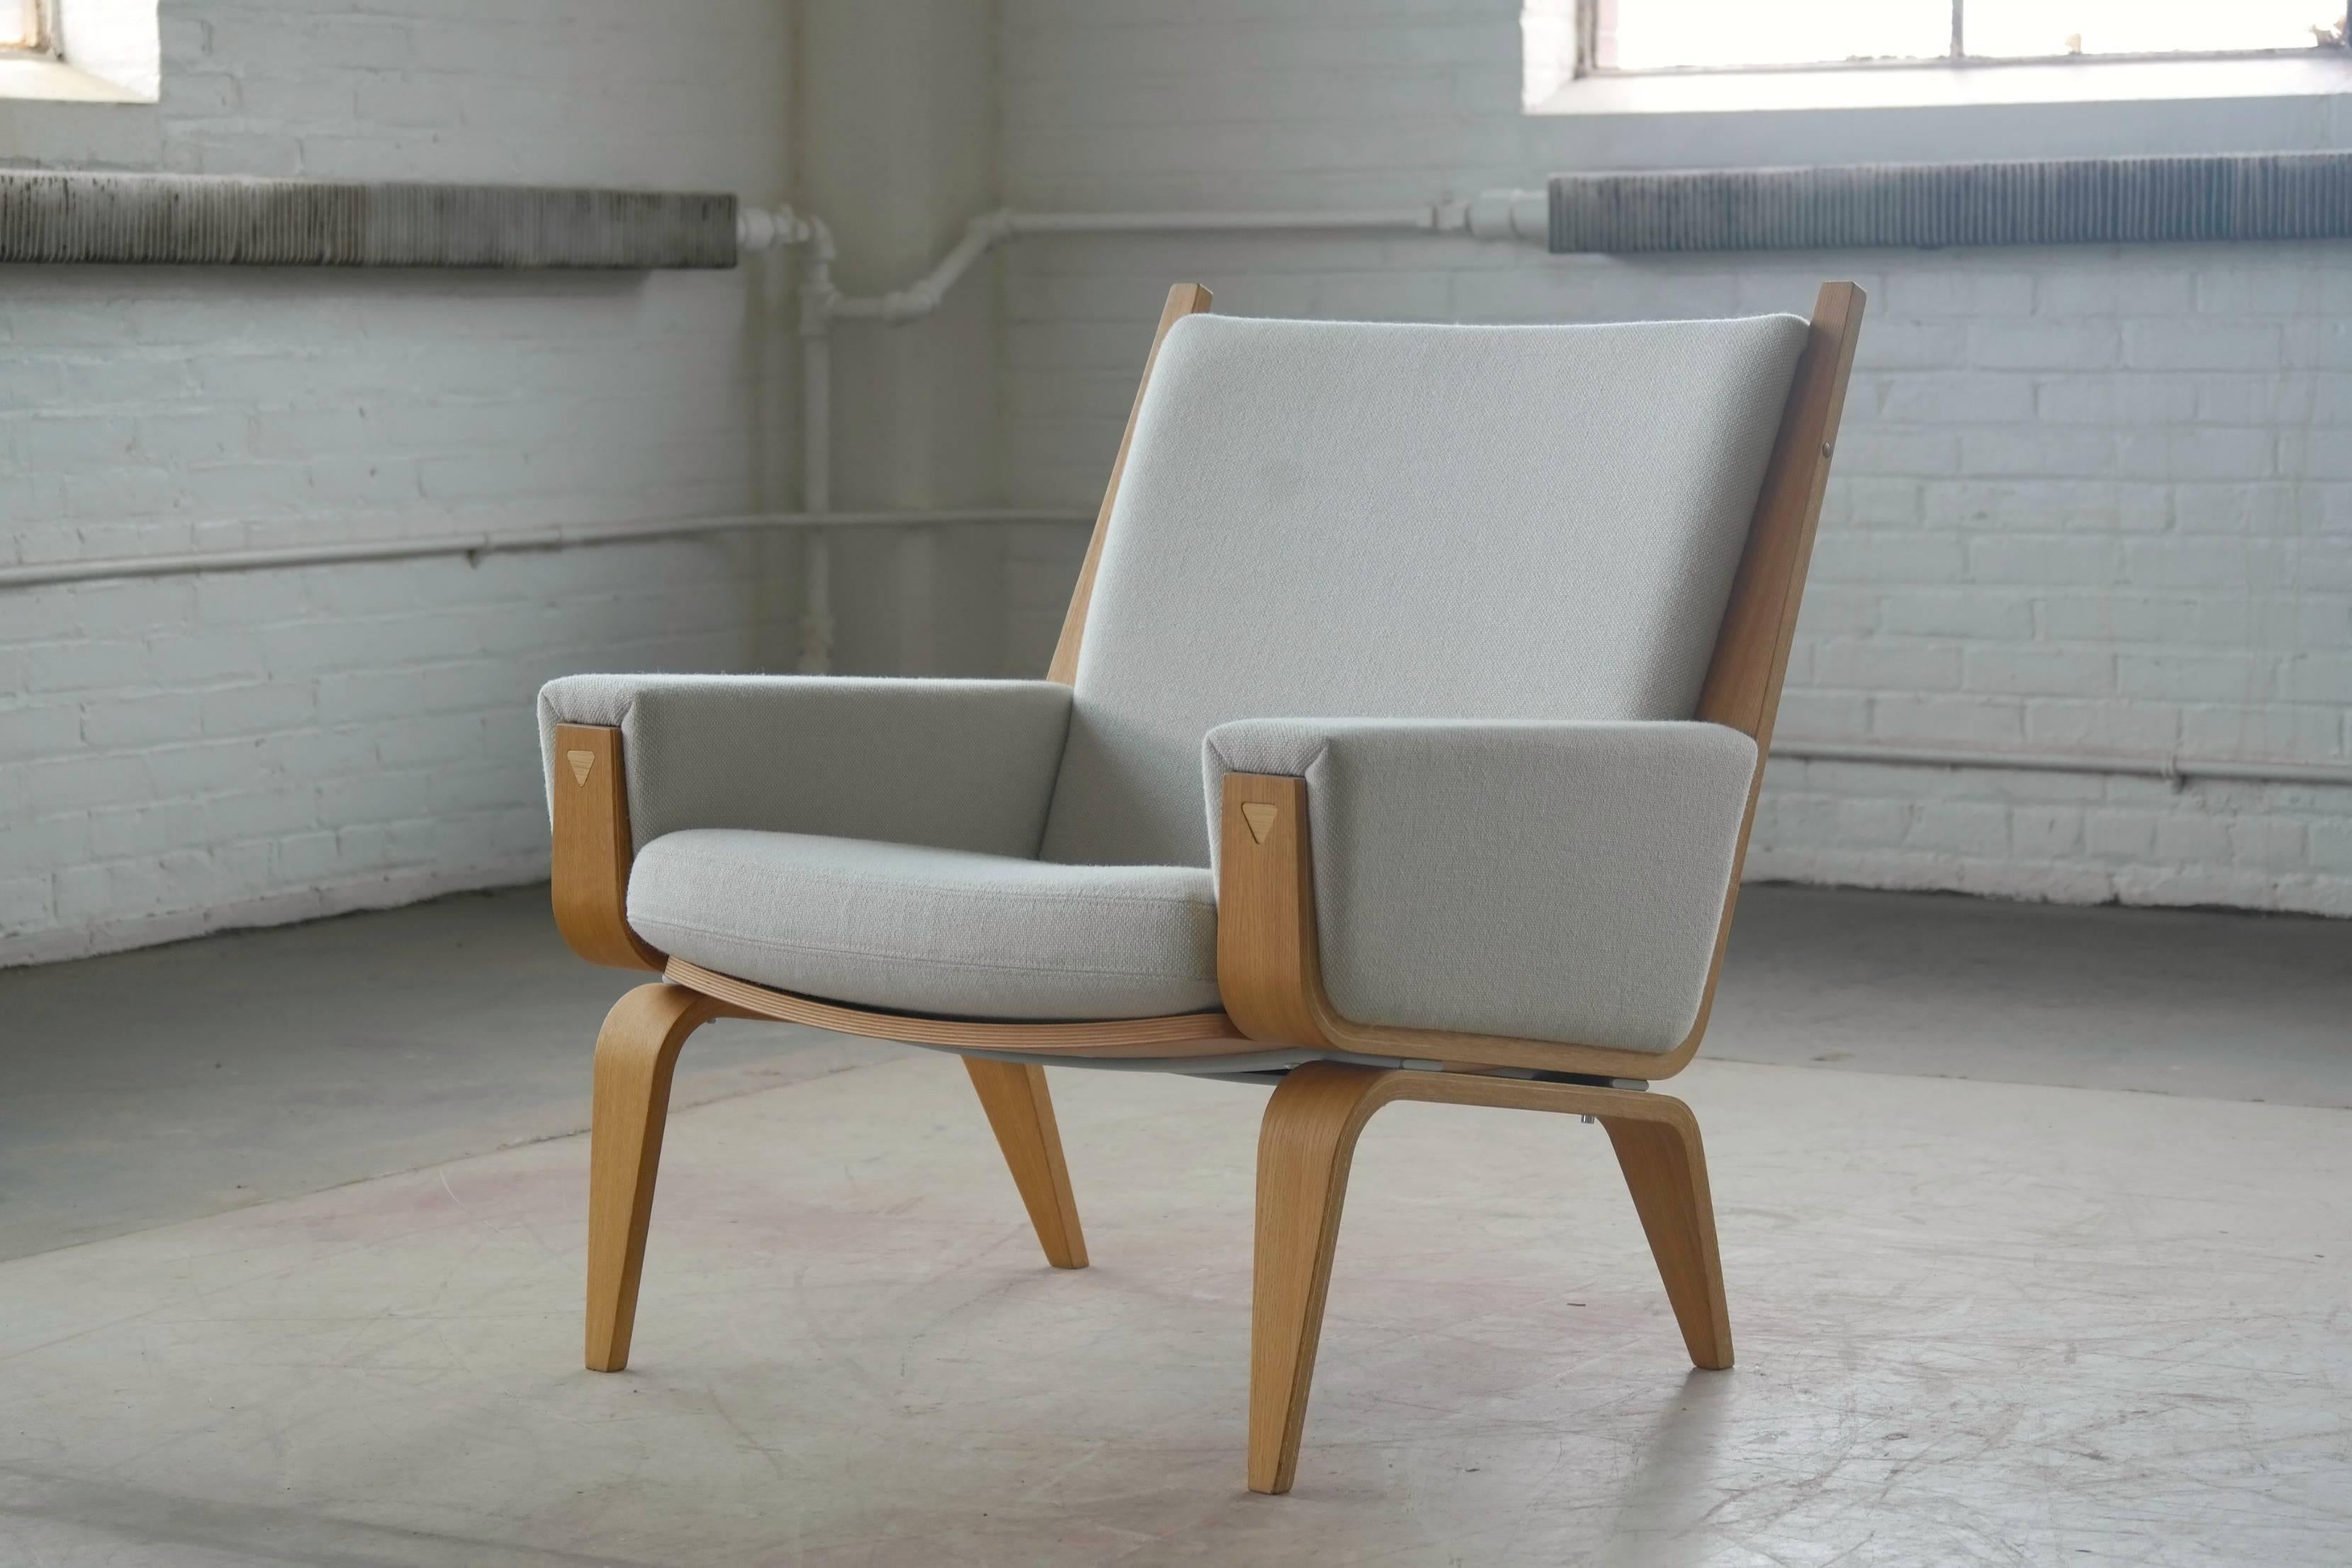 Stunningly beautiful low back Hans Wegner easy chair model 501 designed in 1967 and manufactured by GETAMA, Denmark. This super elegant chair is a fantastic example of Hans Wegner's design prowess and the master craftsmanship tradition of one of